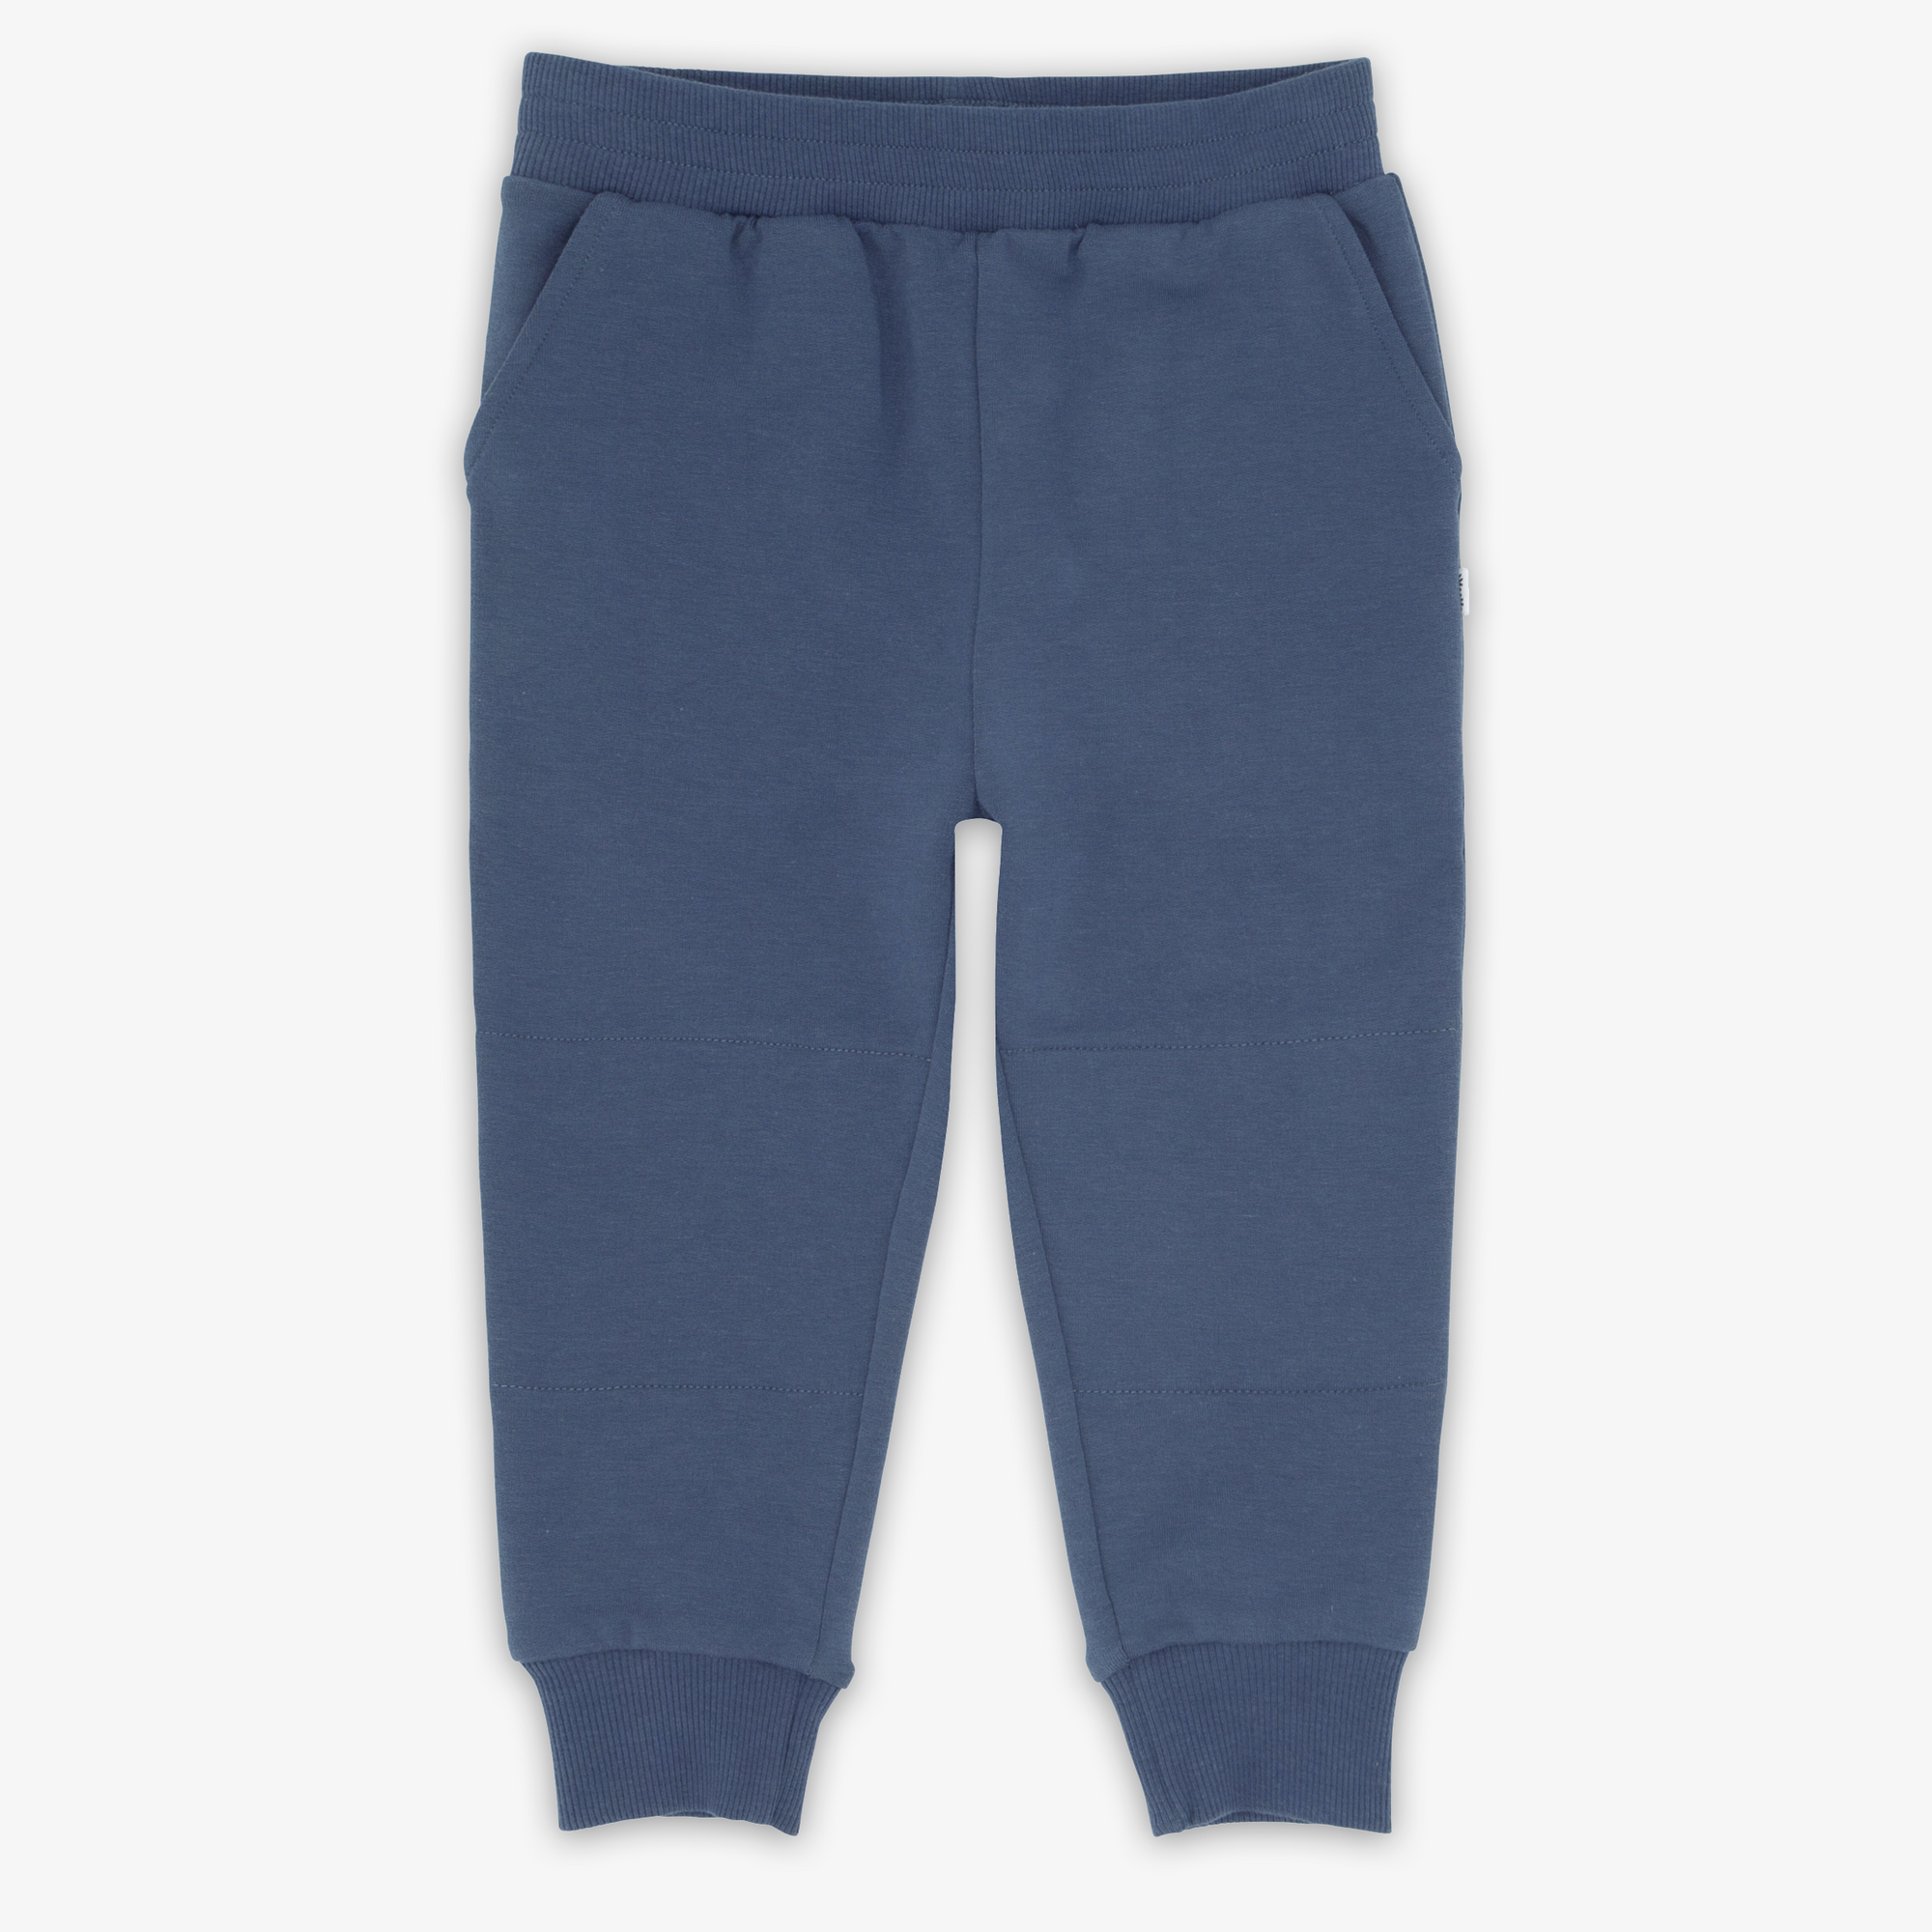 Flat lay image of the Vintage Navy Jogger